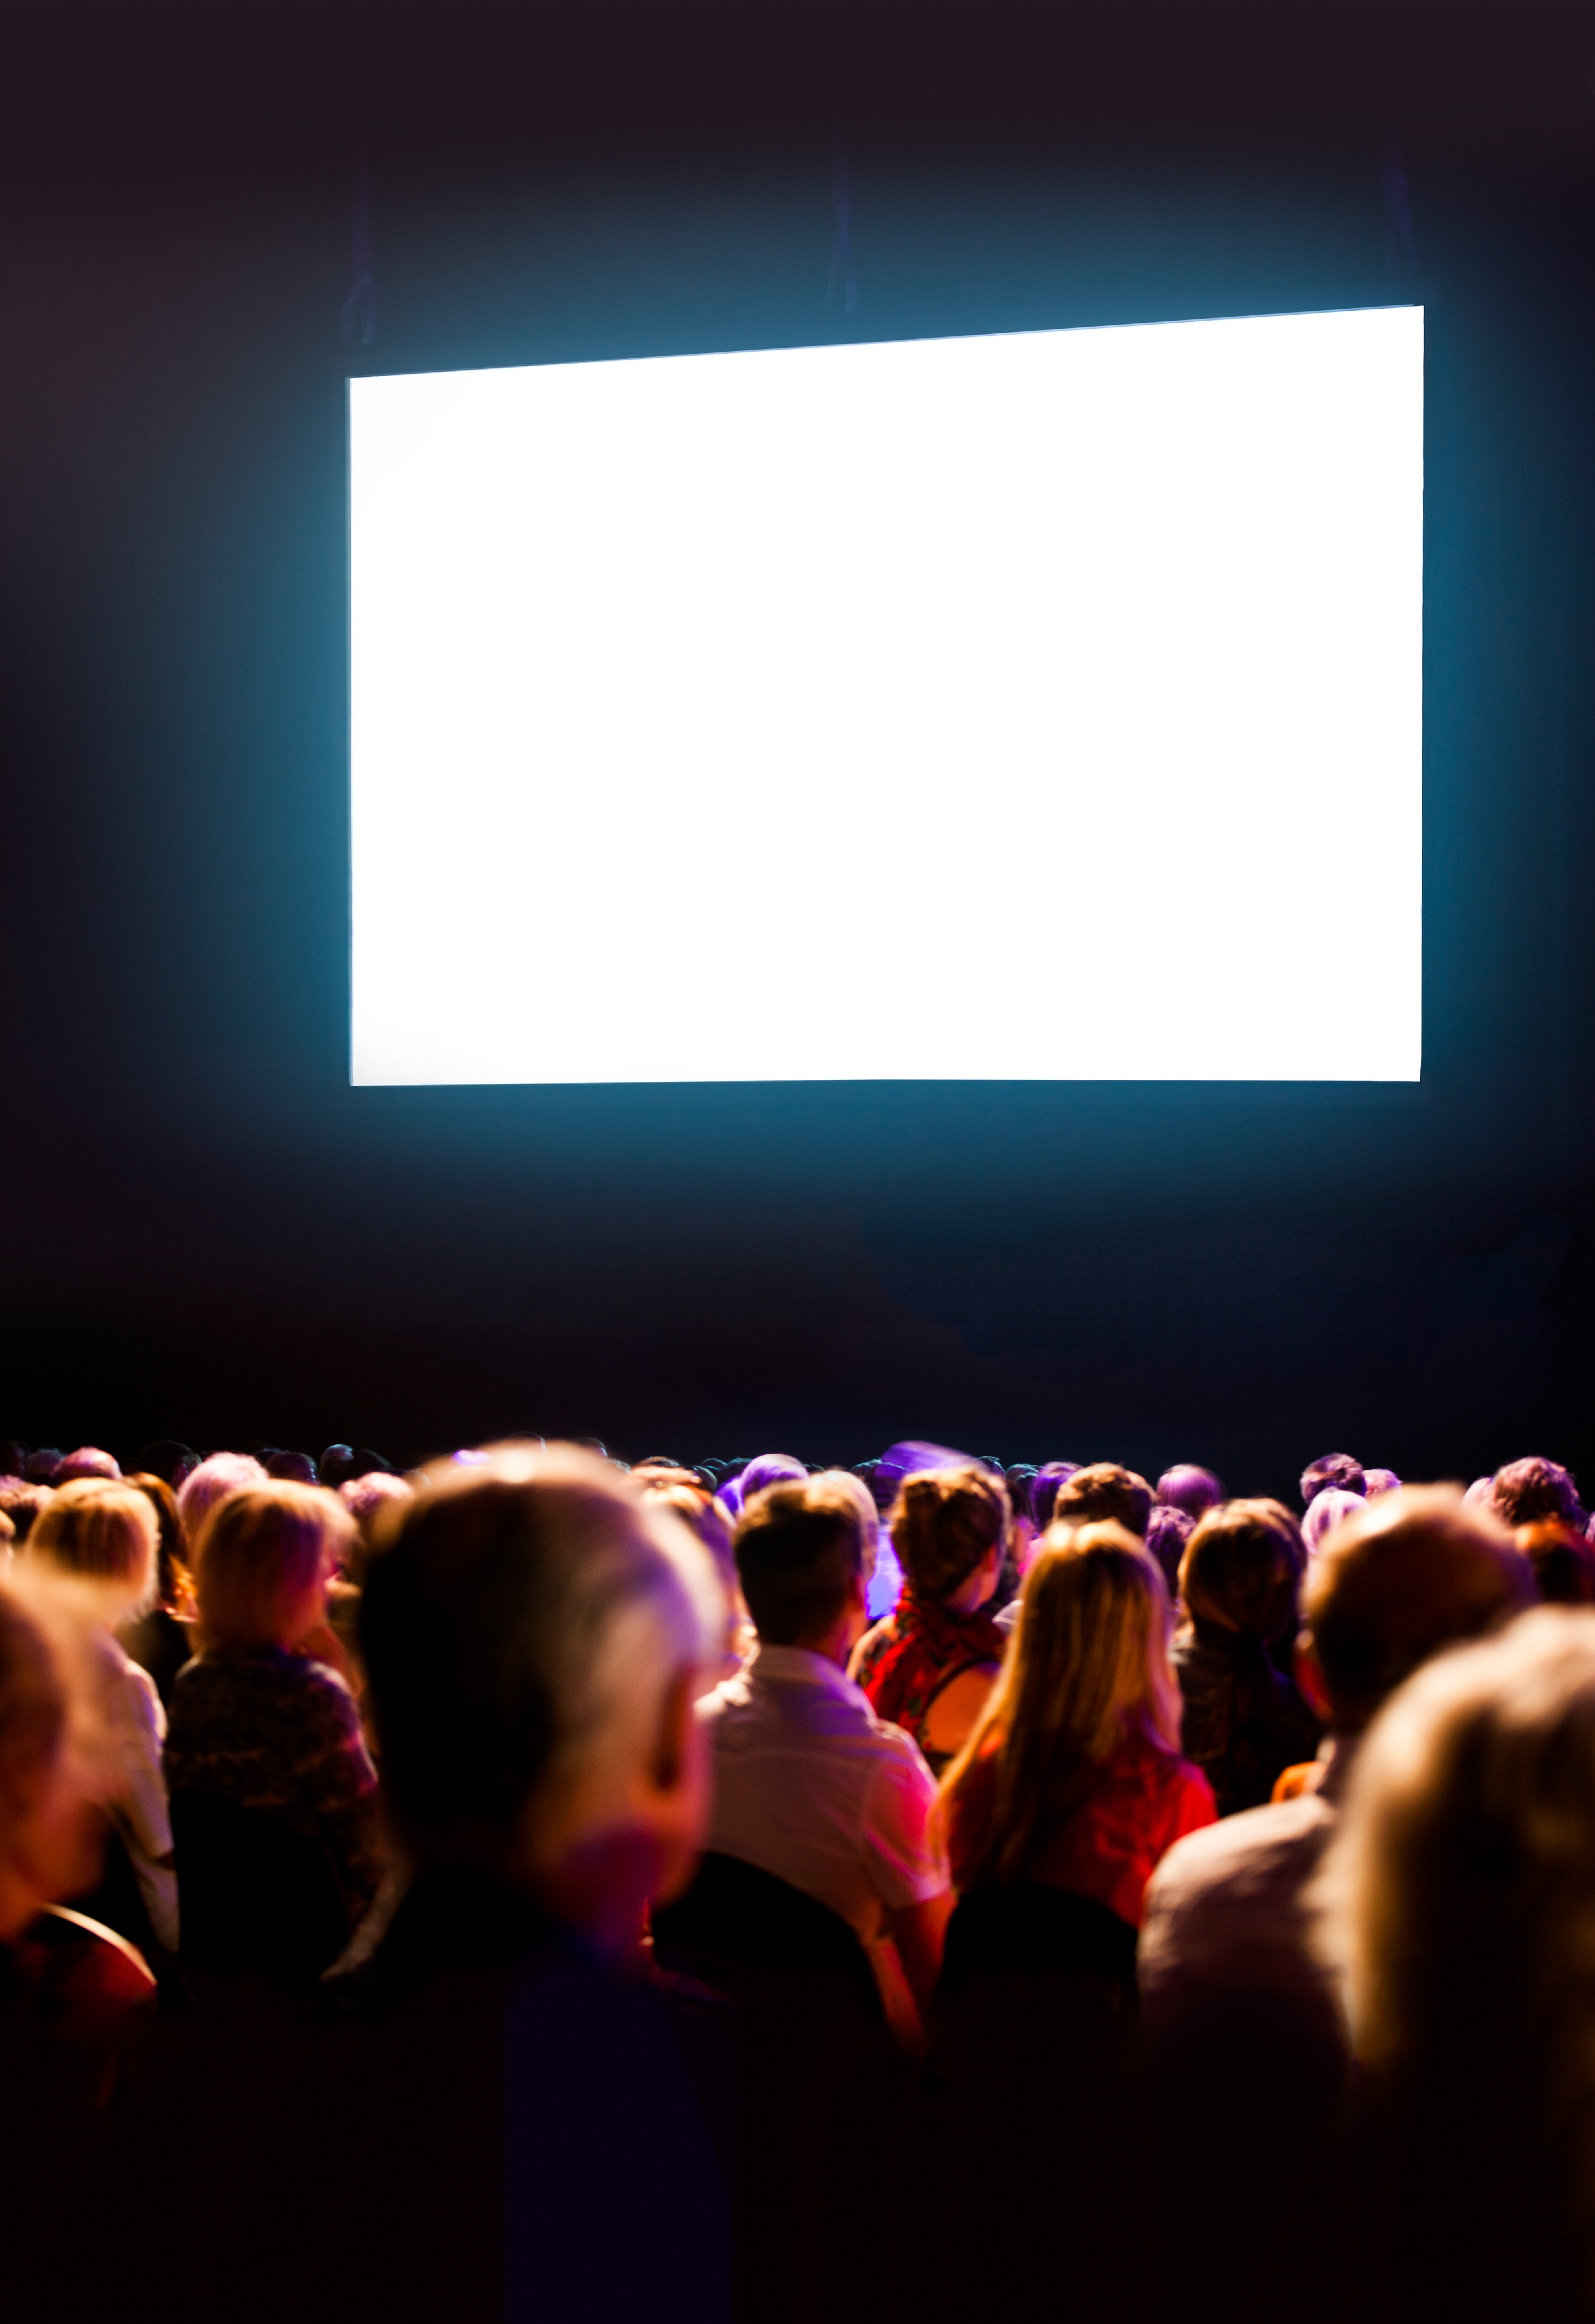 Audience watching a blank movie screen